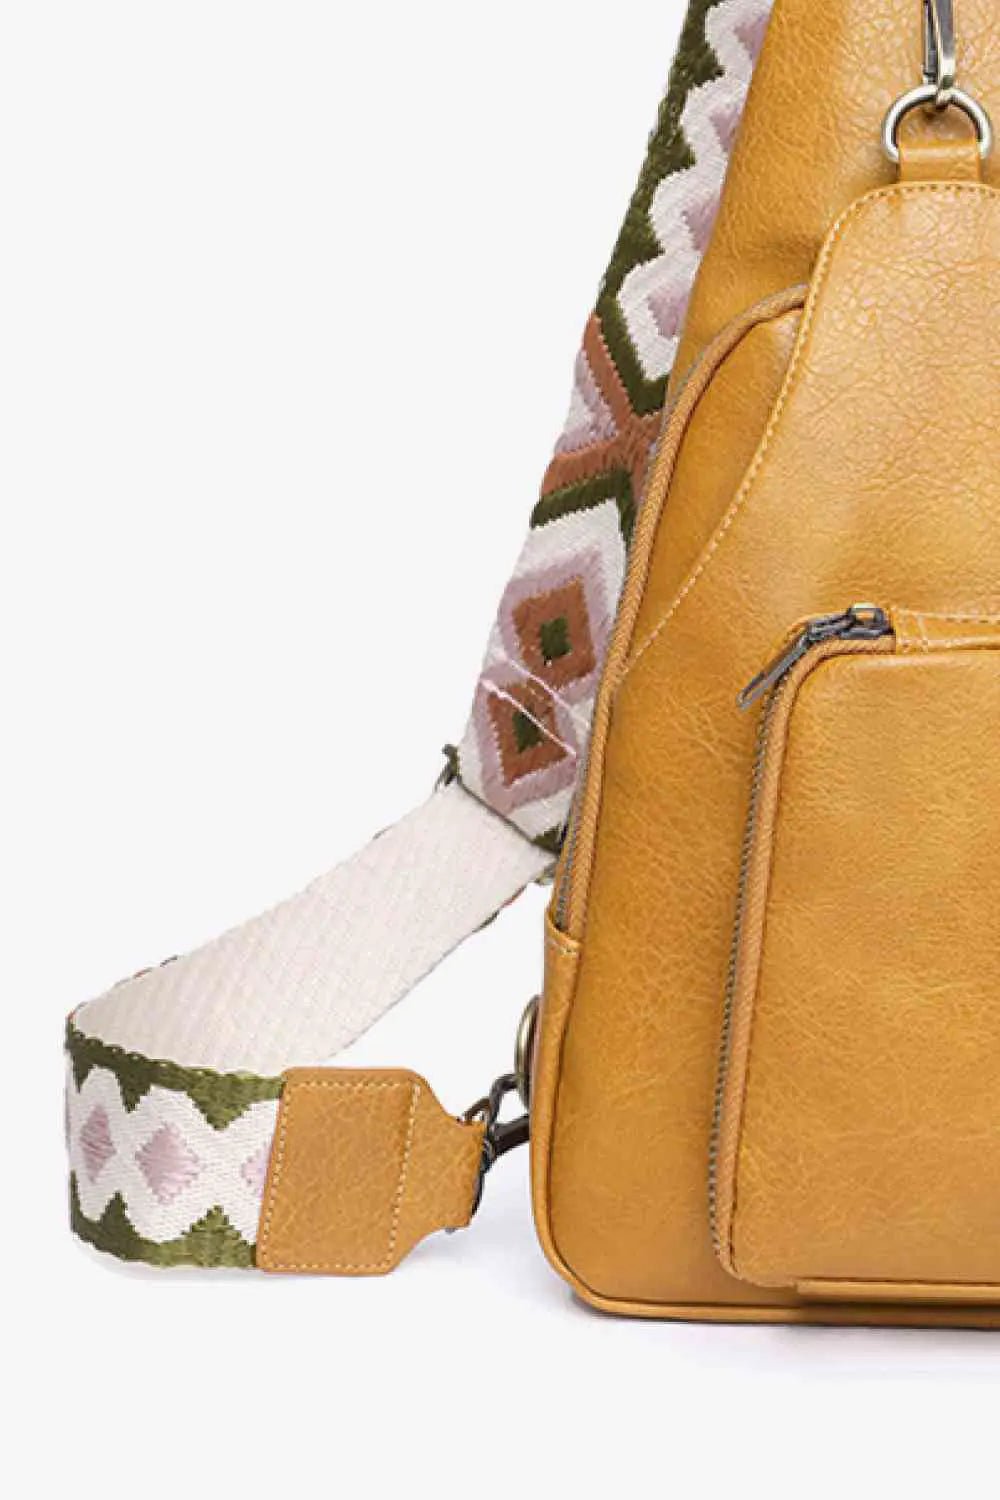 Travel Light and Stylish with the Take A Trip Small Sling Bag | Solid Pattern and PU Leather Material